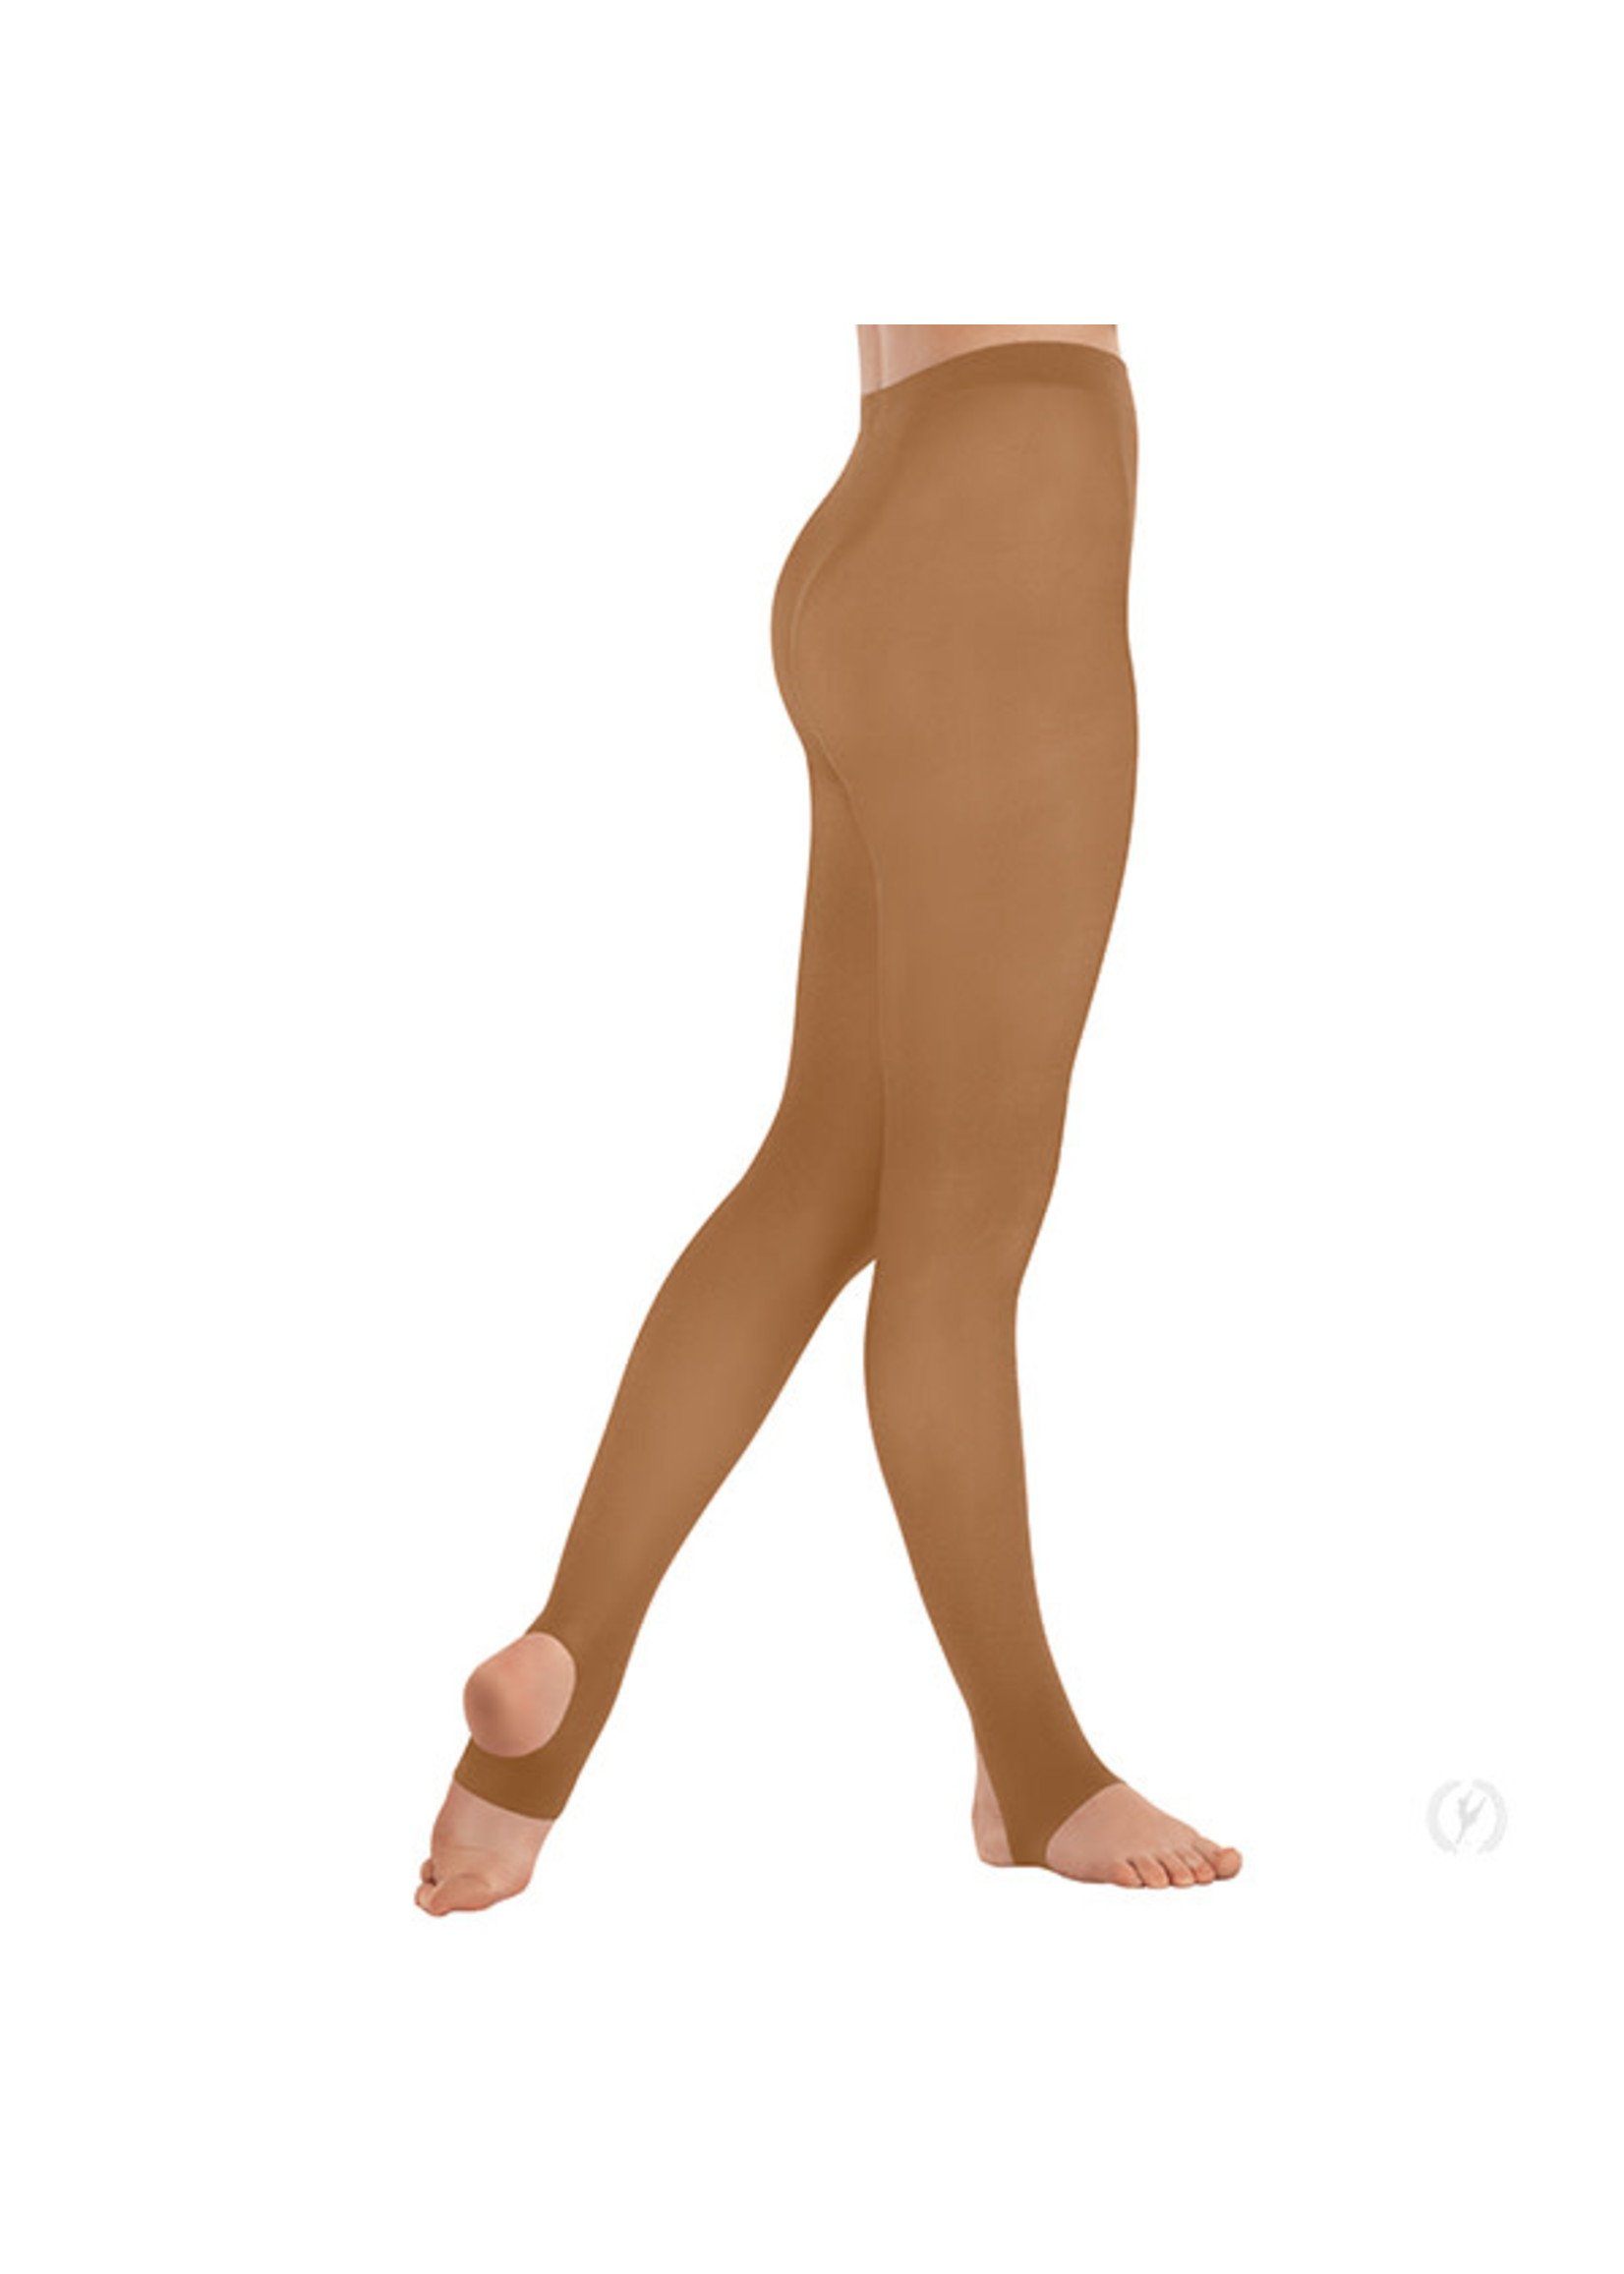 ET Non-Run Stirrup Tights with Soft Knit Waistband